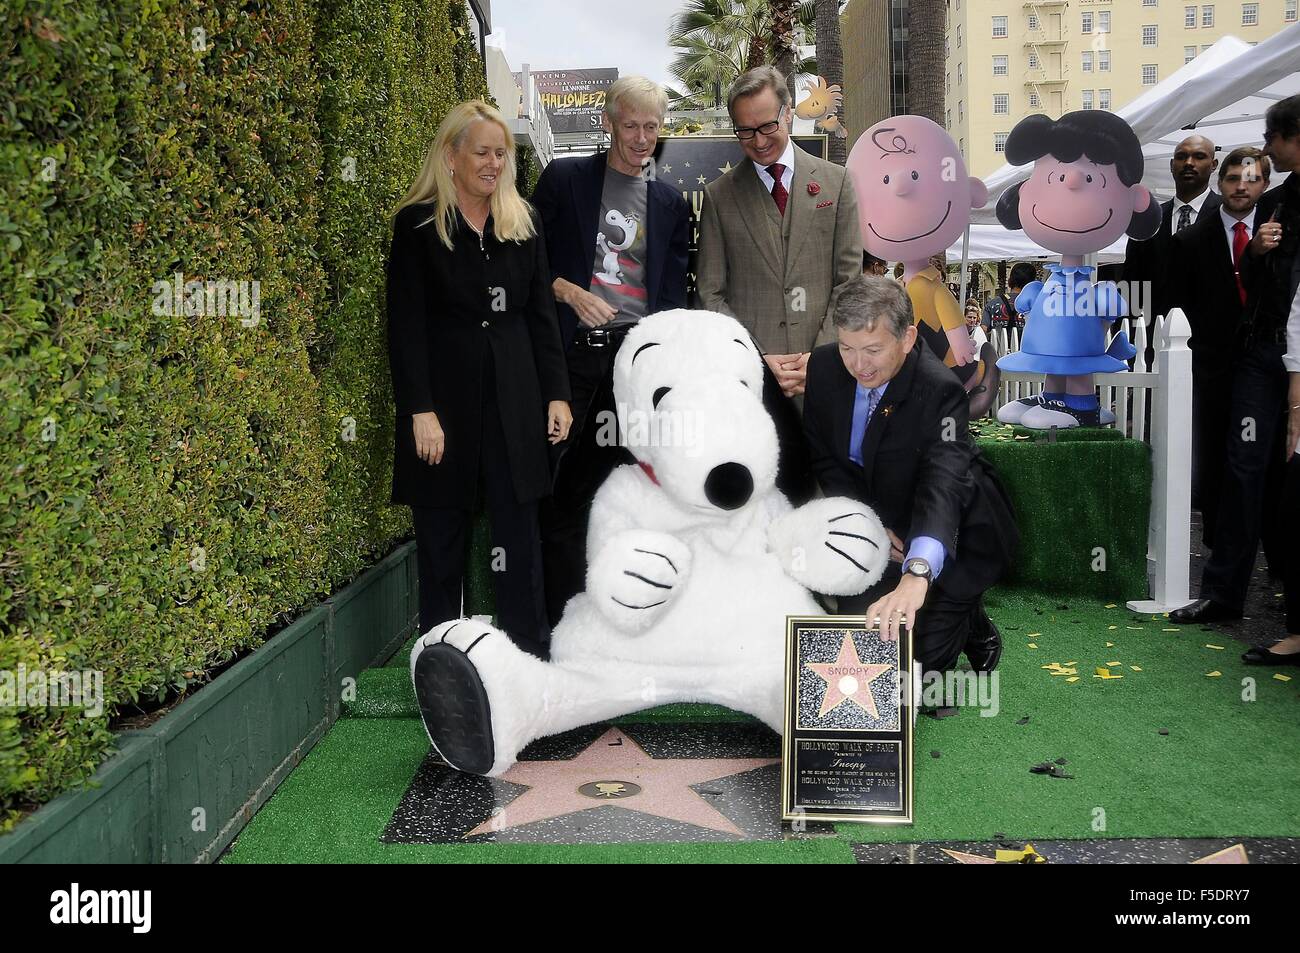 Los Angeles, CA, USA. 2nd Nov, 2015. Beth Marlis, Craig Schultz, Snoopy, Paul Feig, Leron Gubler at the induction ceremony for Star on the Hollywood Walk of Fame for Snoopy, Hollywood Boulevard, Los Angeles, CA November 2, 2015. Credit:  Michael Germana/Everett Collection/Alamy Live News Stock Photo